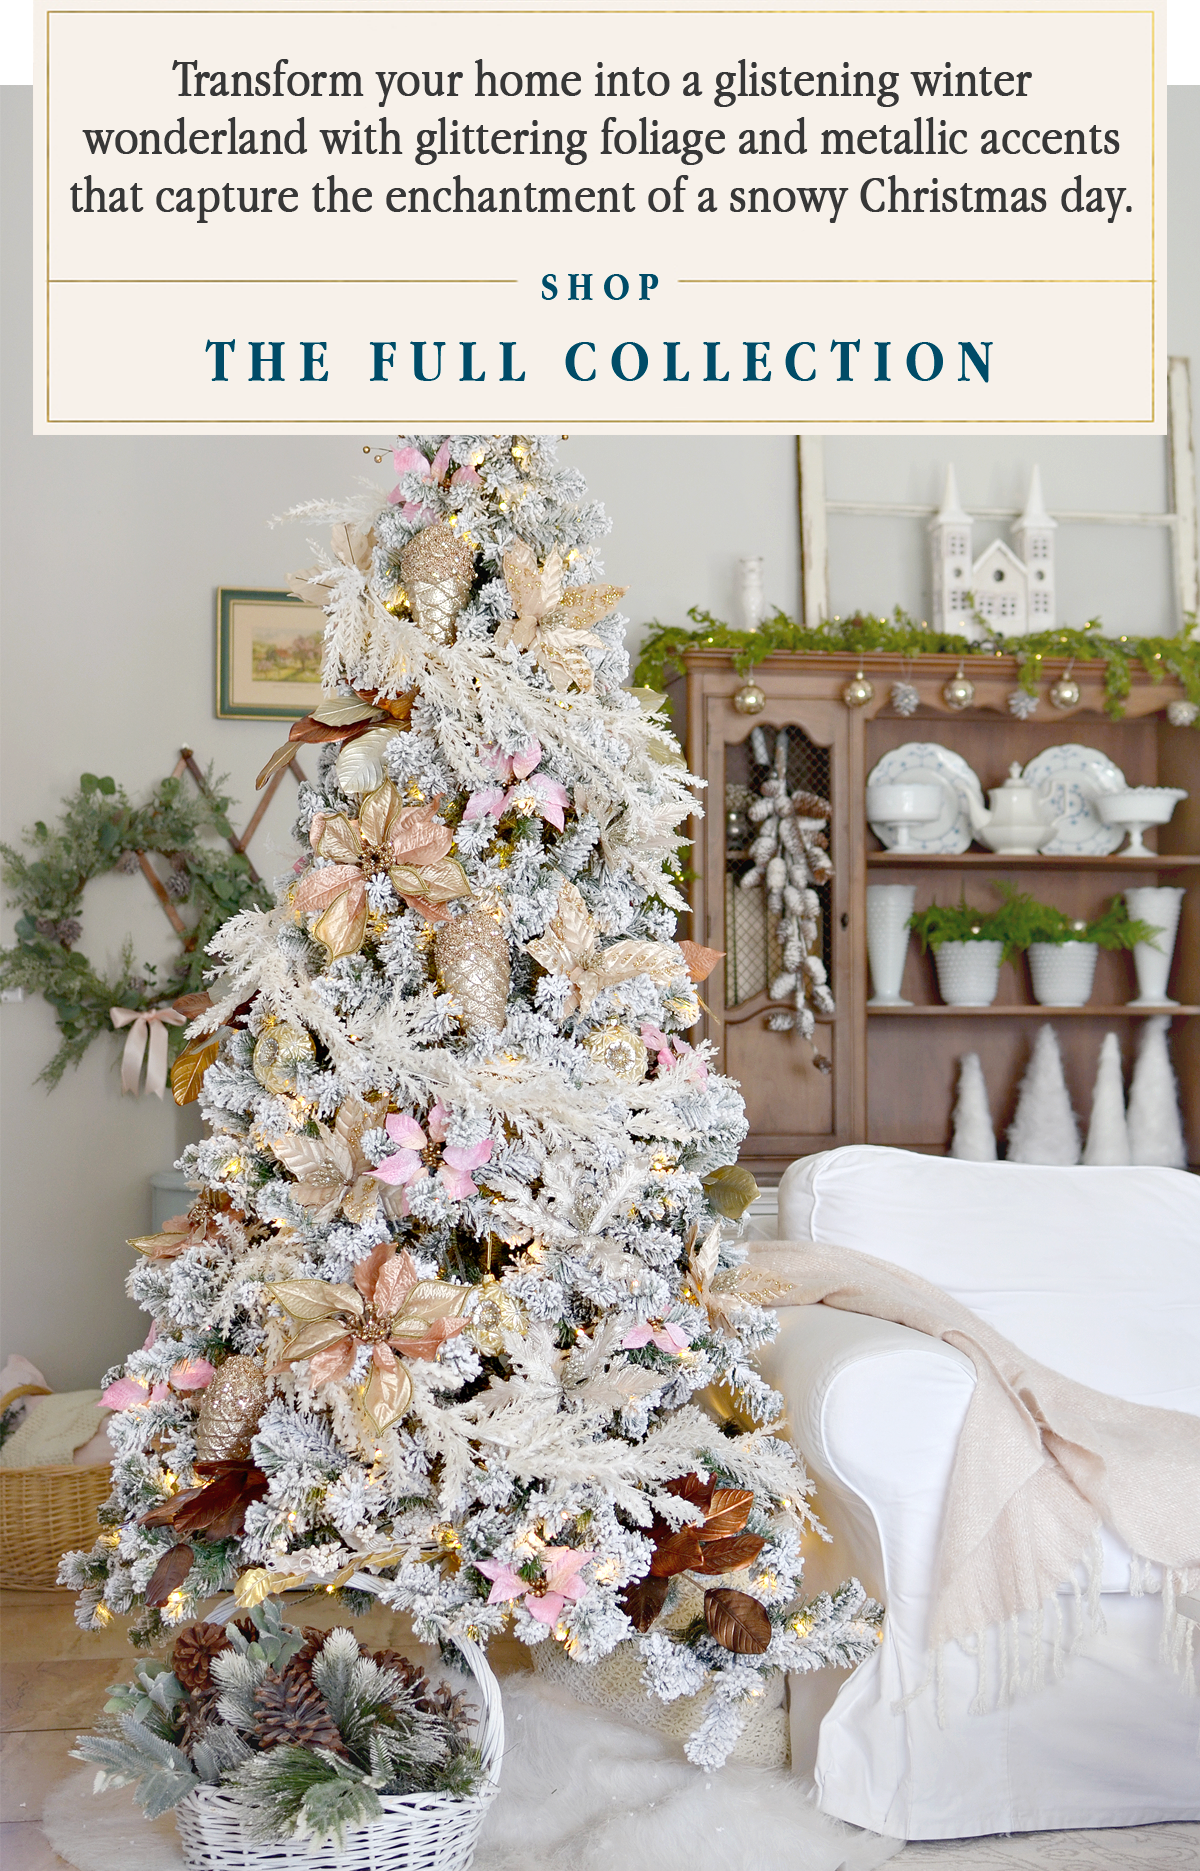 Transform your home into a glistening winter wonderland with glittering foliage and metallic accents that capture the enchantment of a snowy Christmas day.   Shop the Full Collection